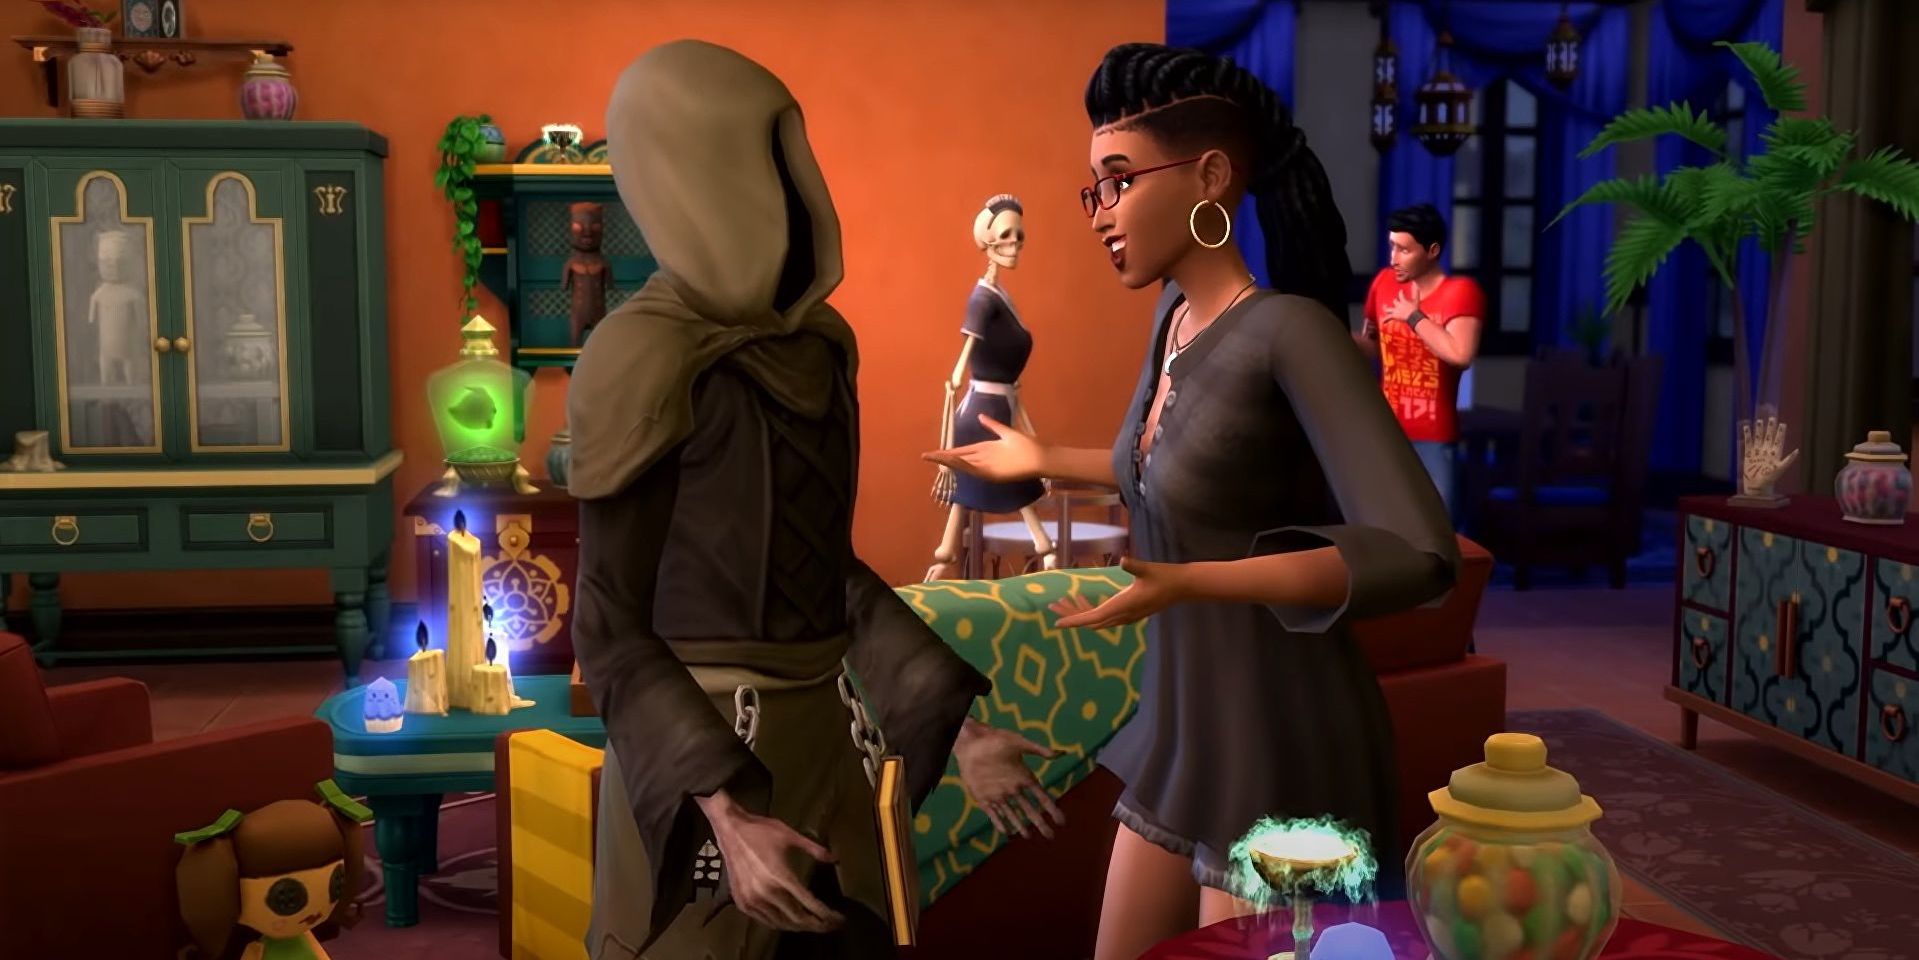 The Sims 4's Paranormal Expansion